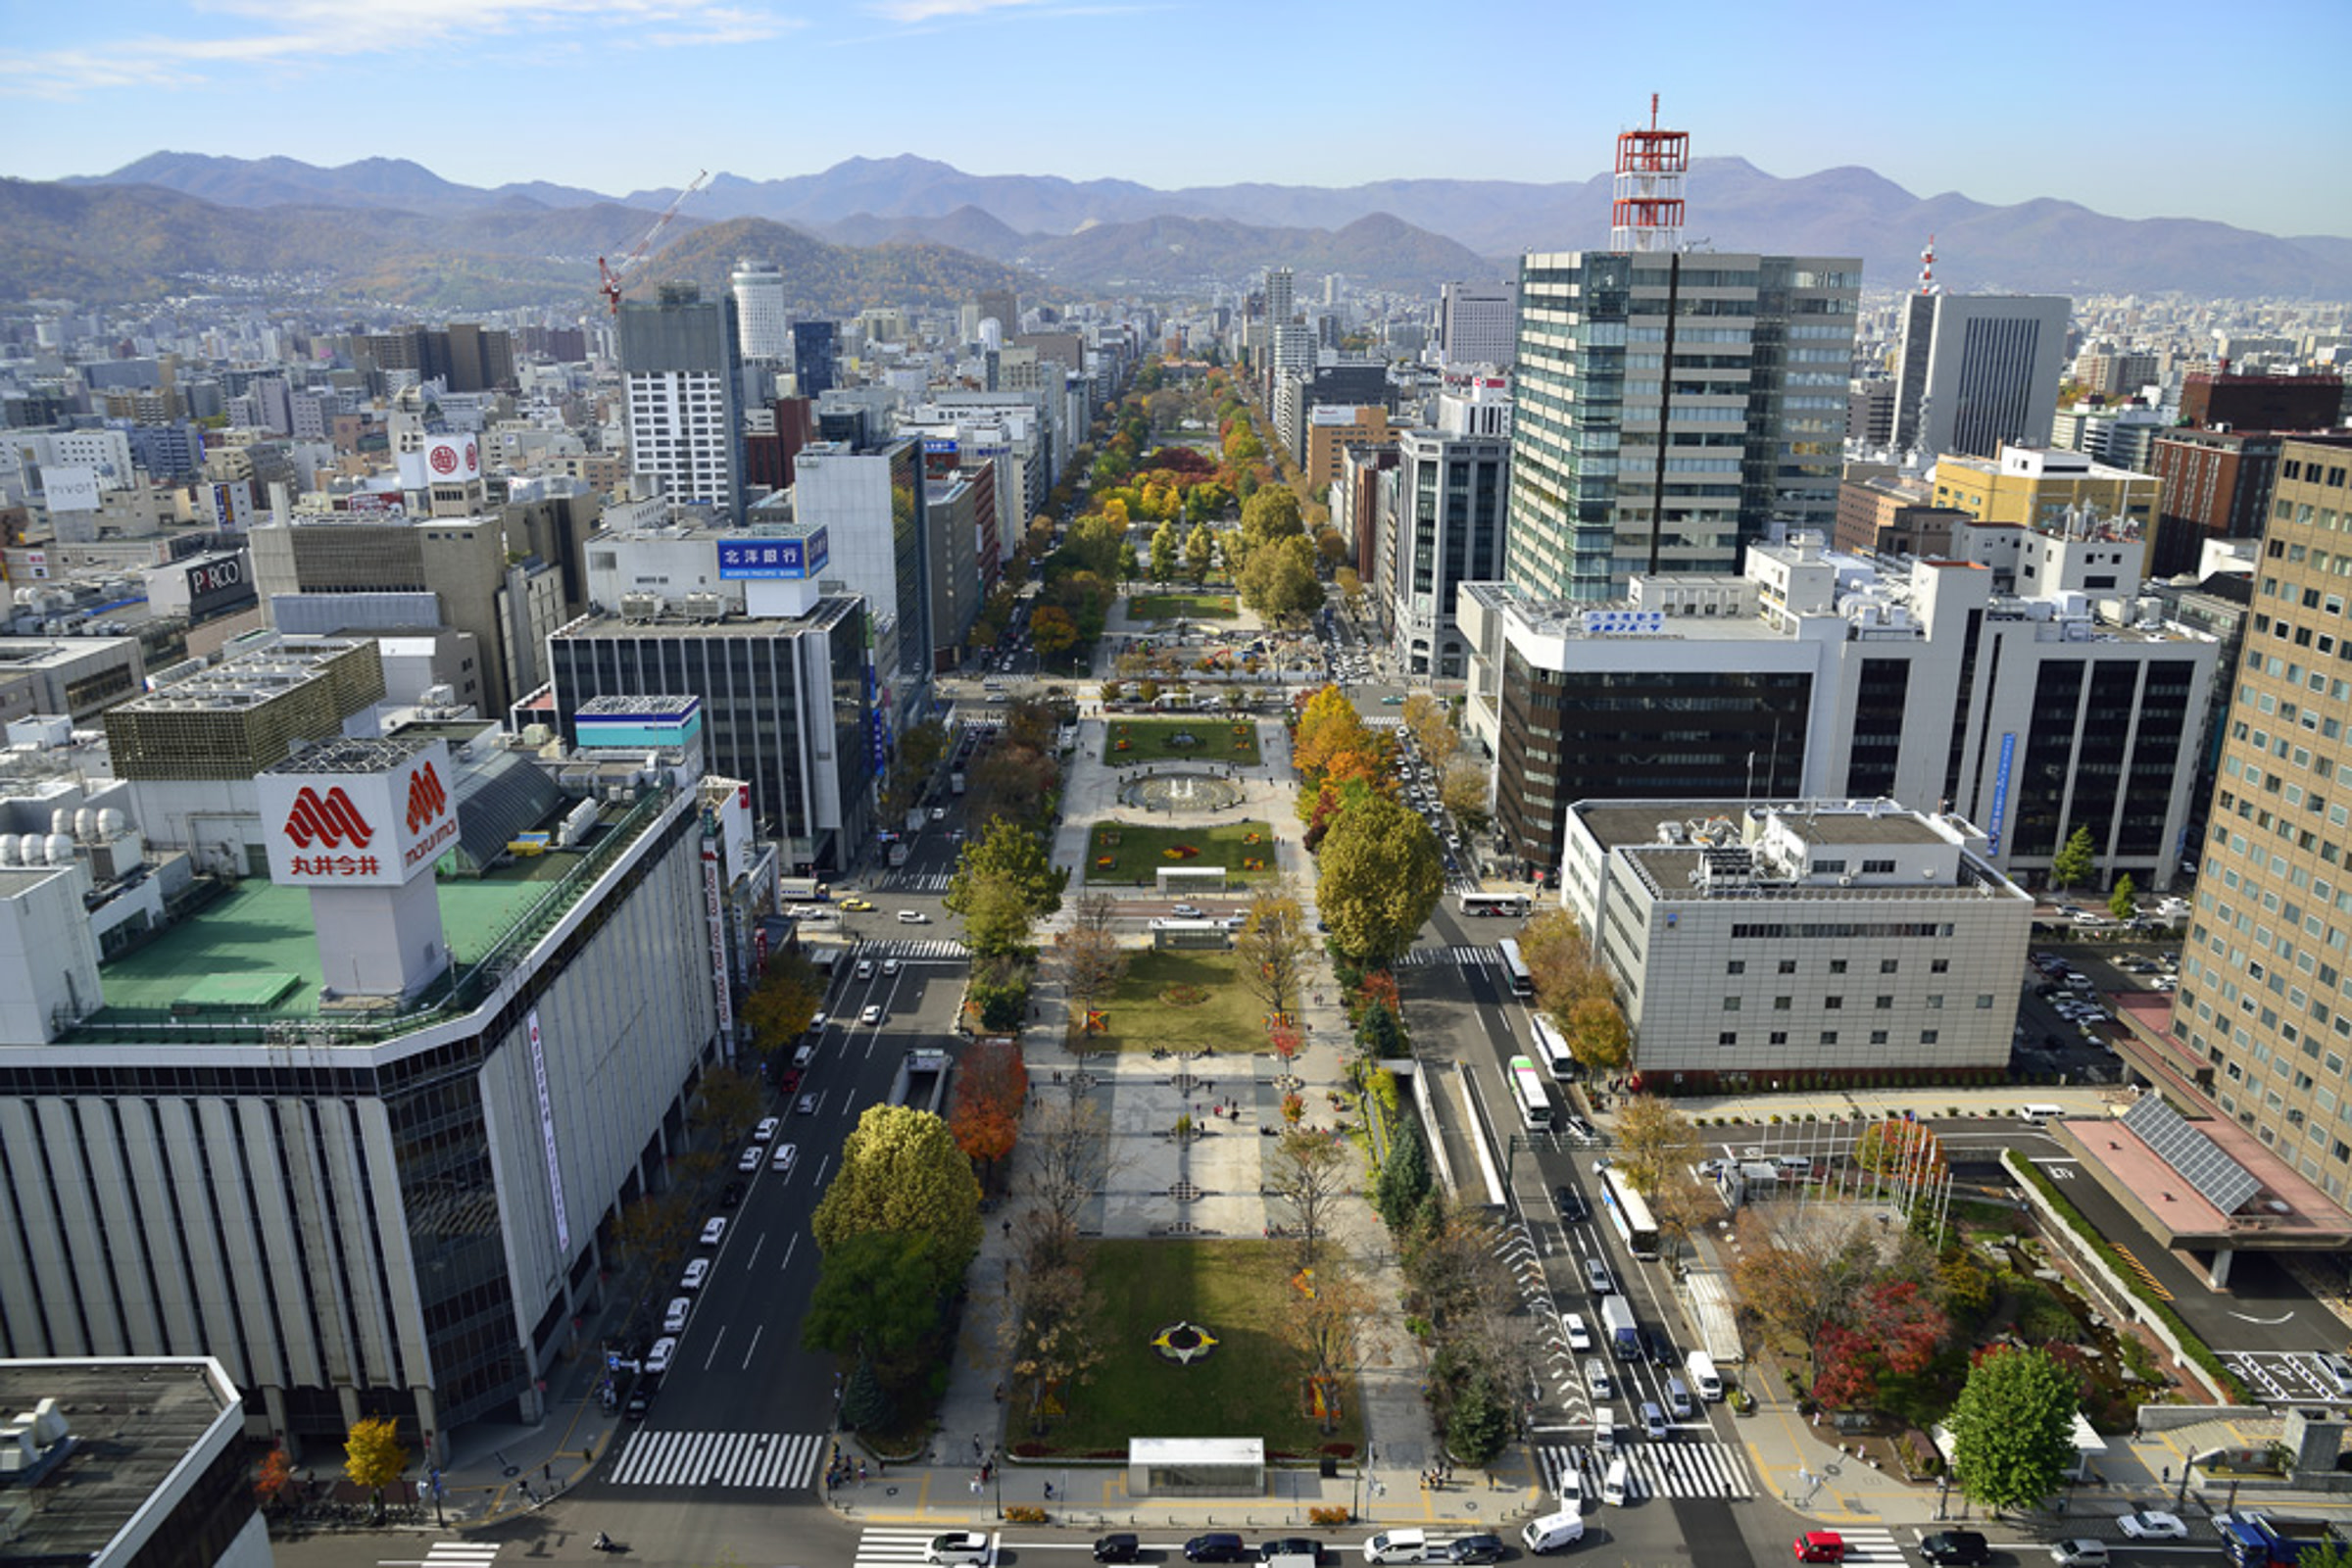 An aerial view of Odori Park in Sapporo. The park stretches out across the middle of a large city, flanked by skyscrapers.